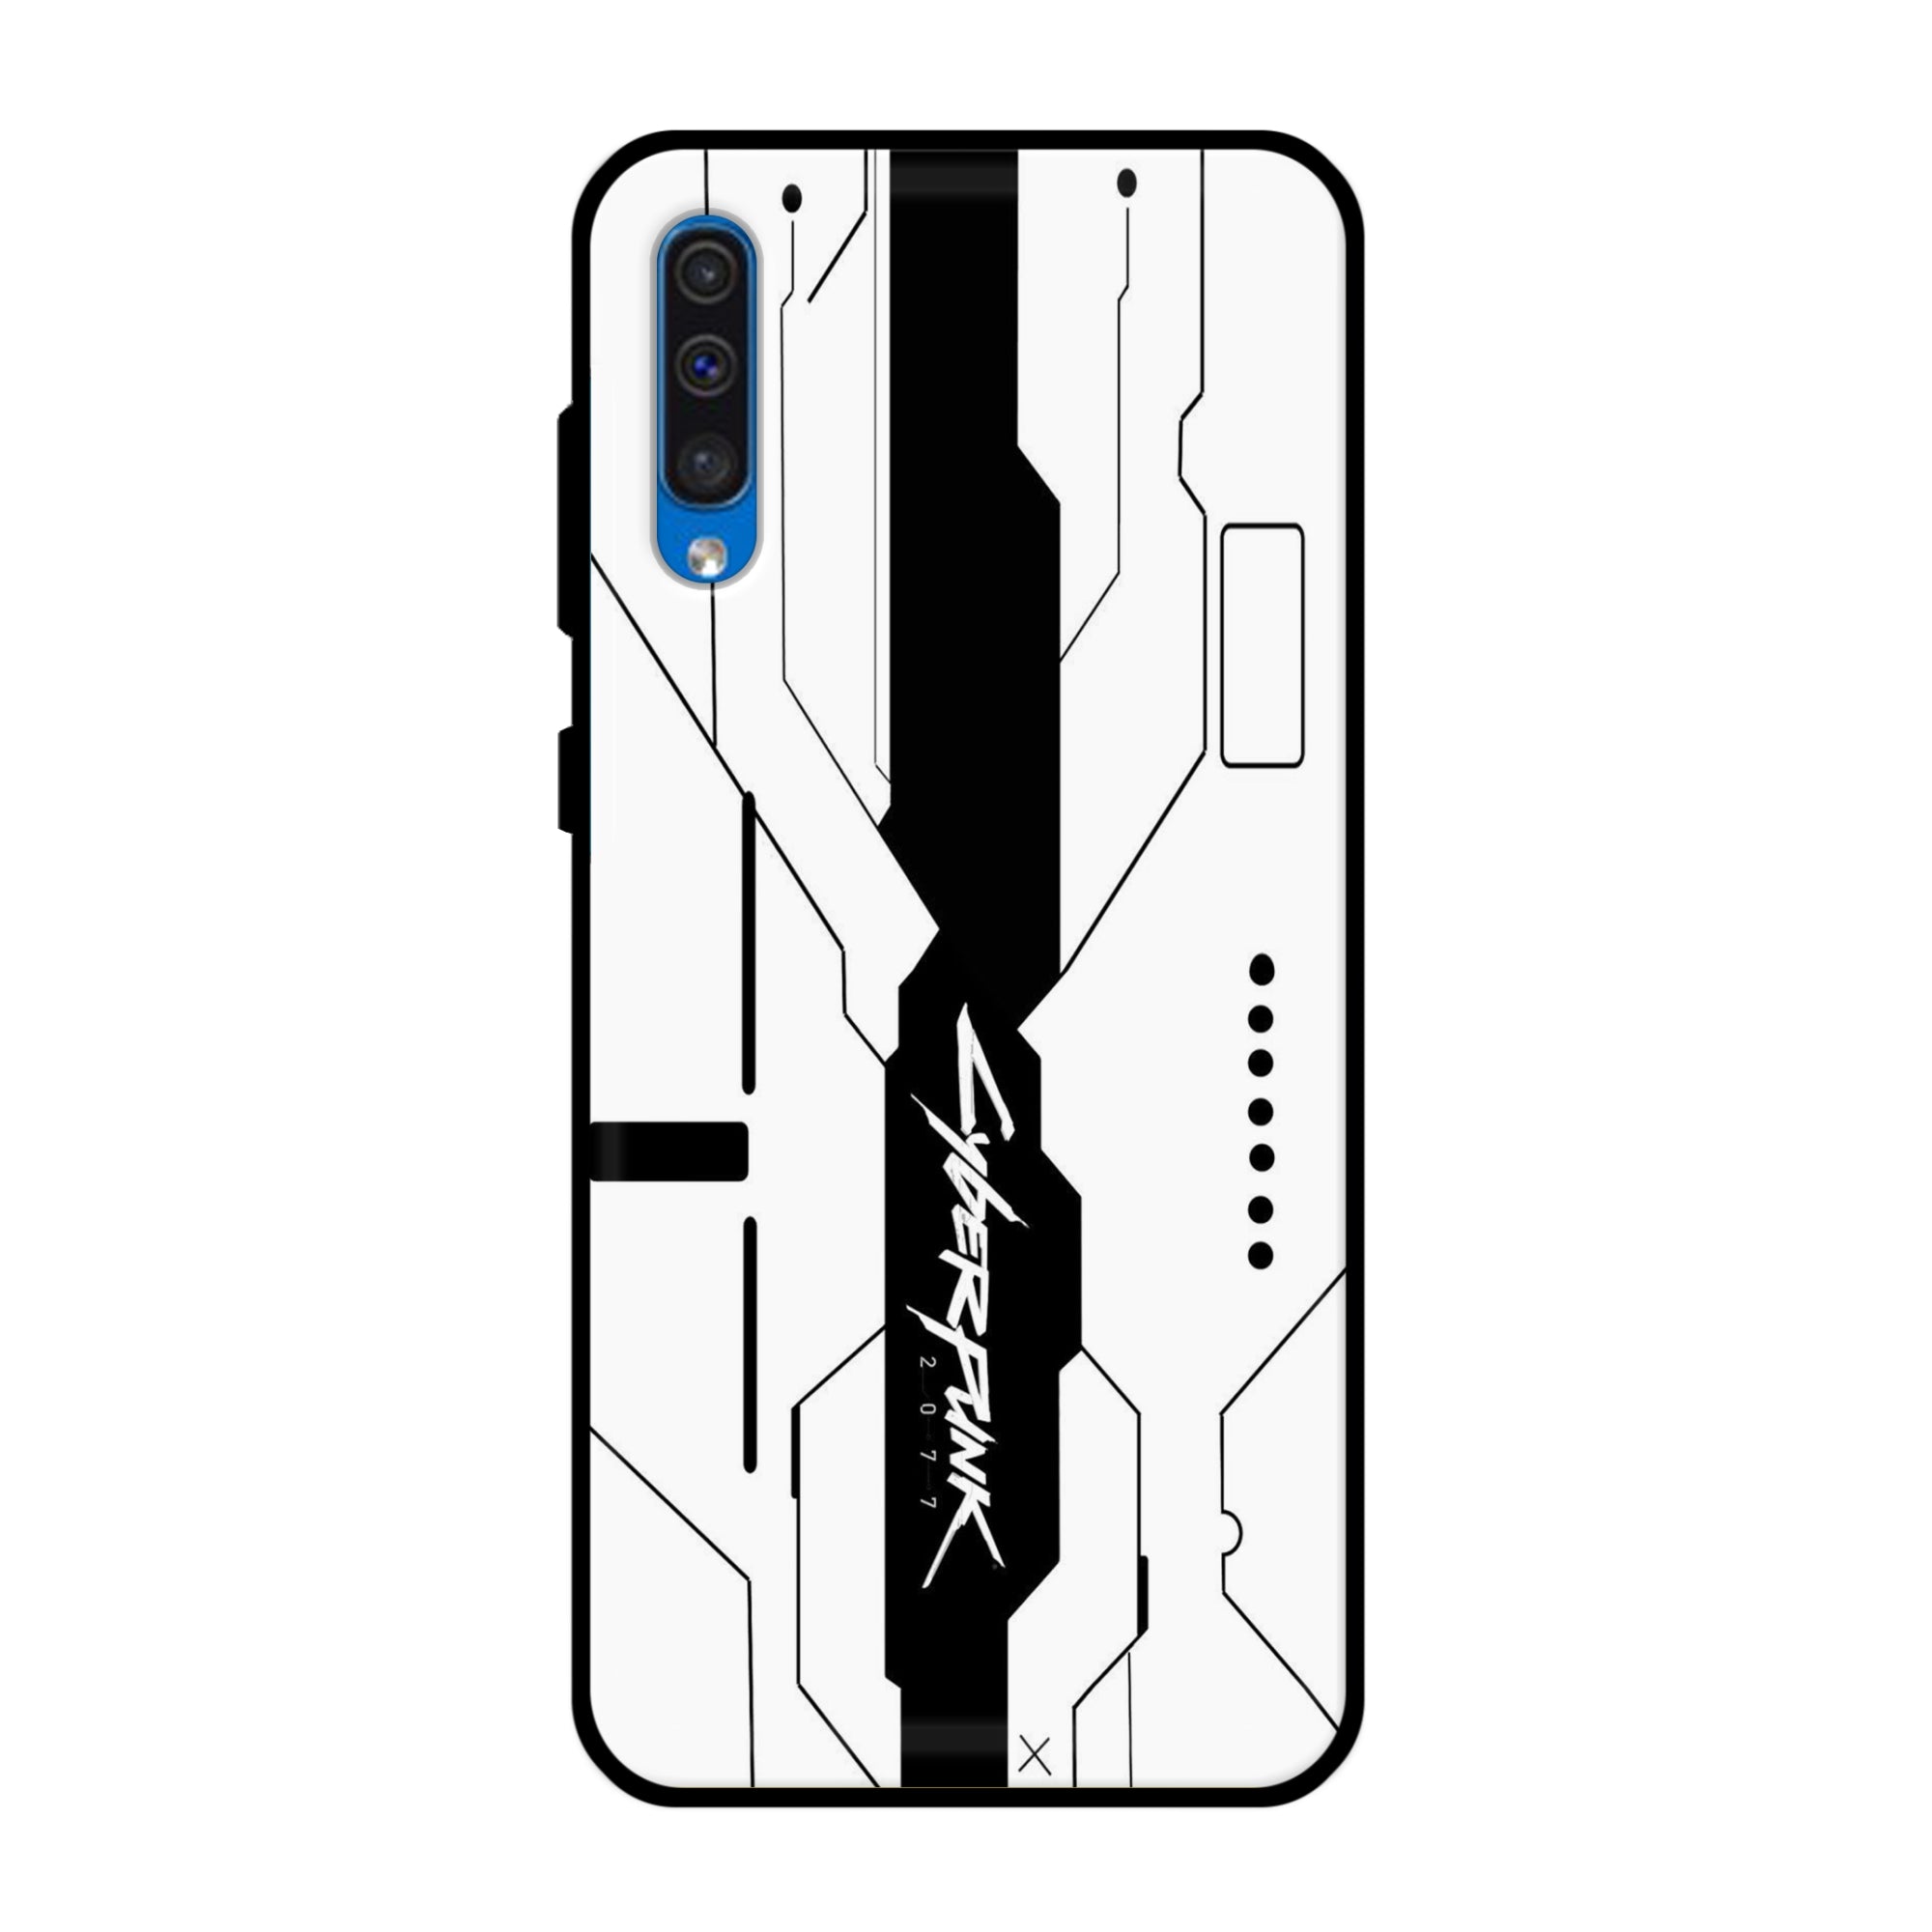 Buy Cyberpunk 2077 Metal-Silicon Back Mobile Phone Case/Cover For Samsung Galaxy A50 / A50s / A30s Online